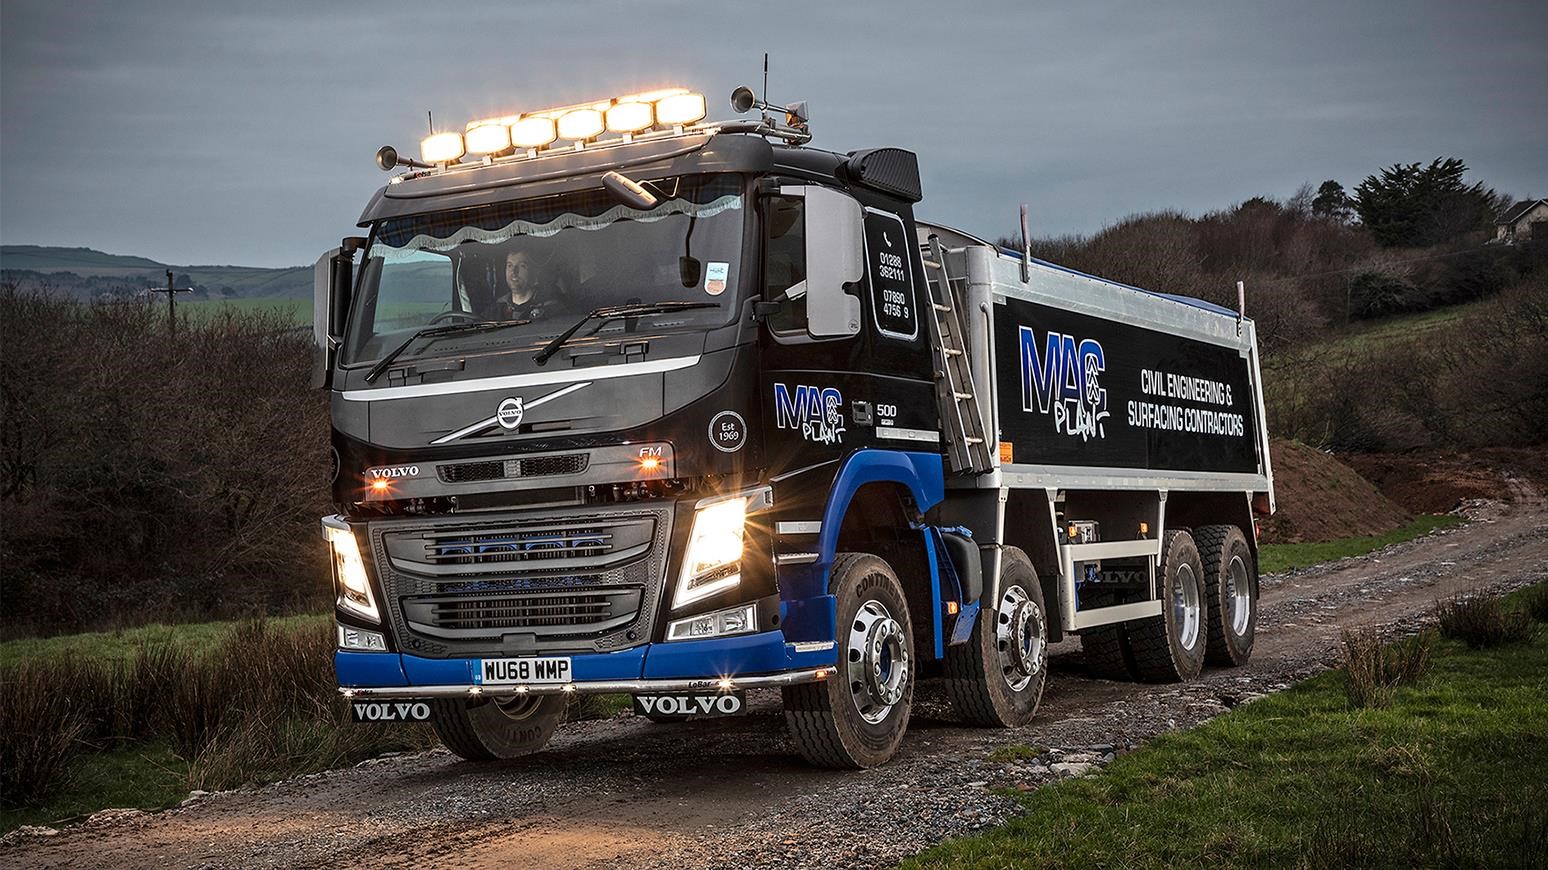 Civil Engineering Company Buys First Brand-New Truck, A Volvo FM-500 8x4 Tipper